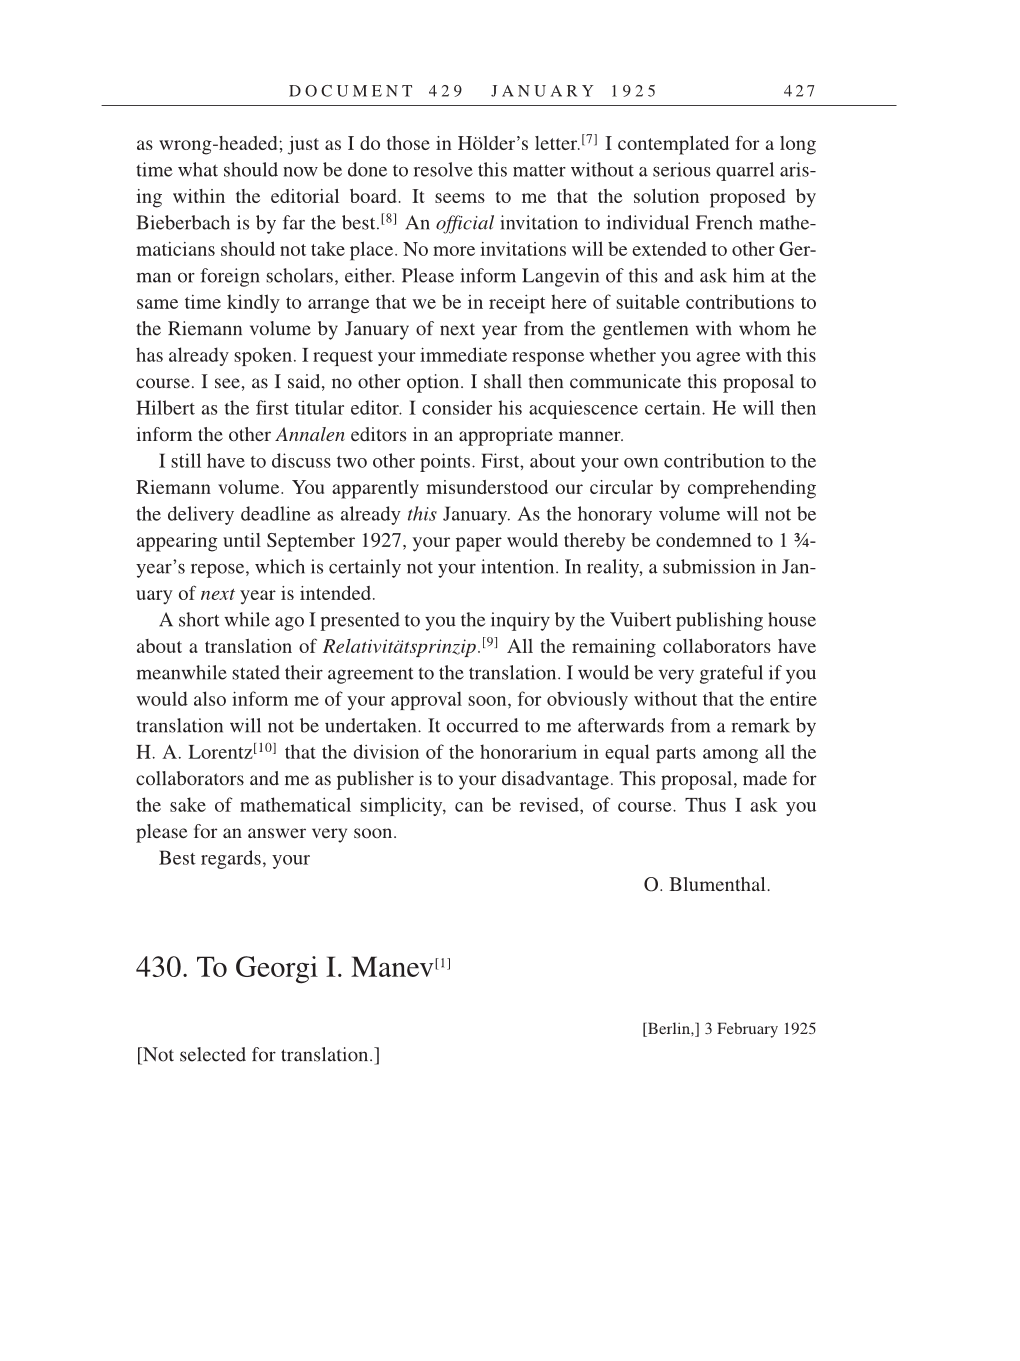 Volume 14: The Berlin Years: Writings & Correspondence, April 1923-May 1925 (English Translation Supplement) page 427